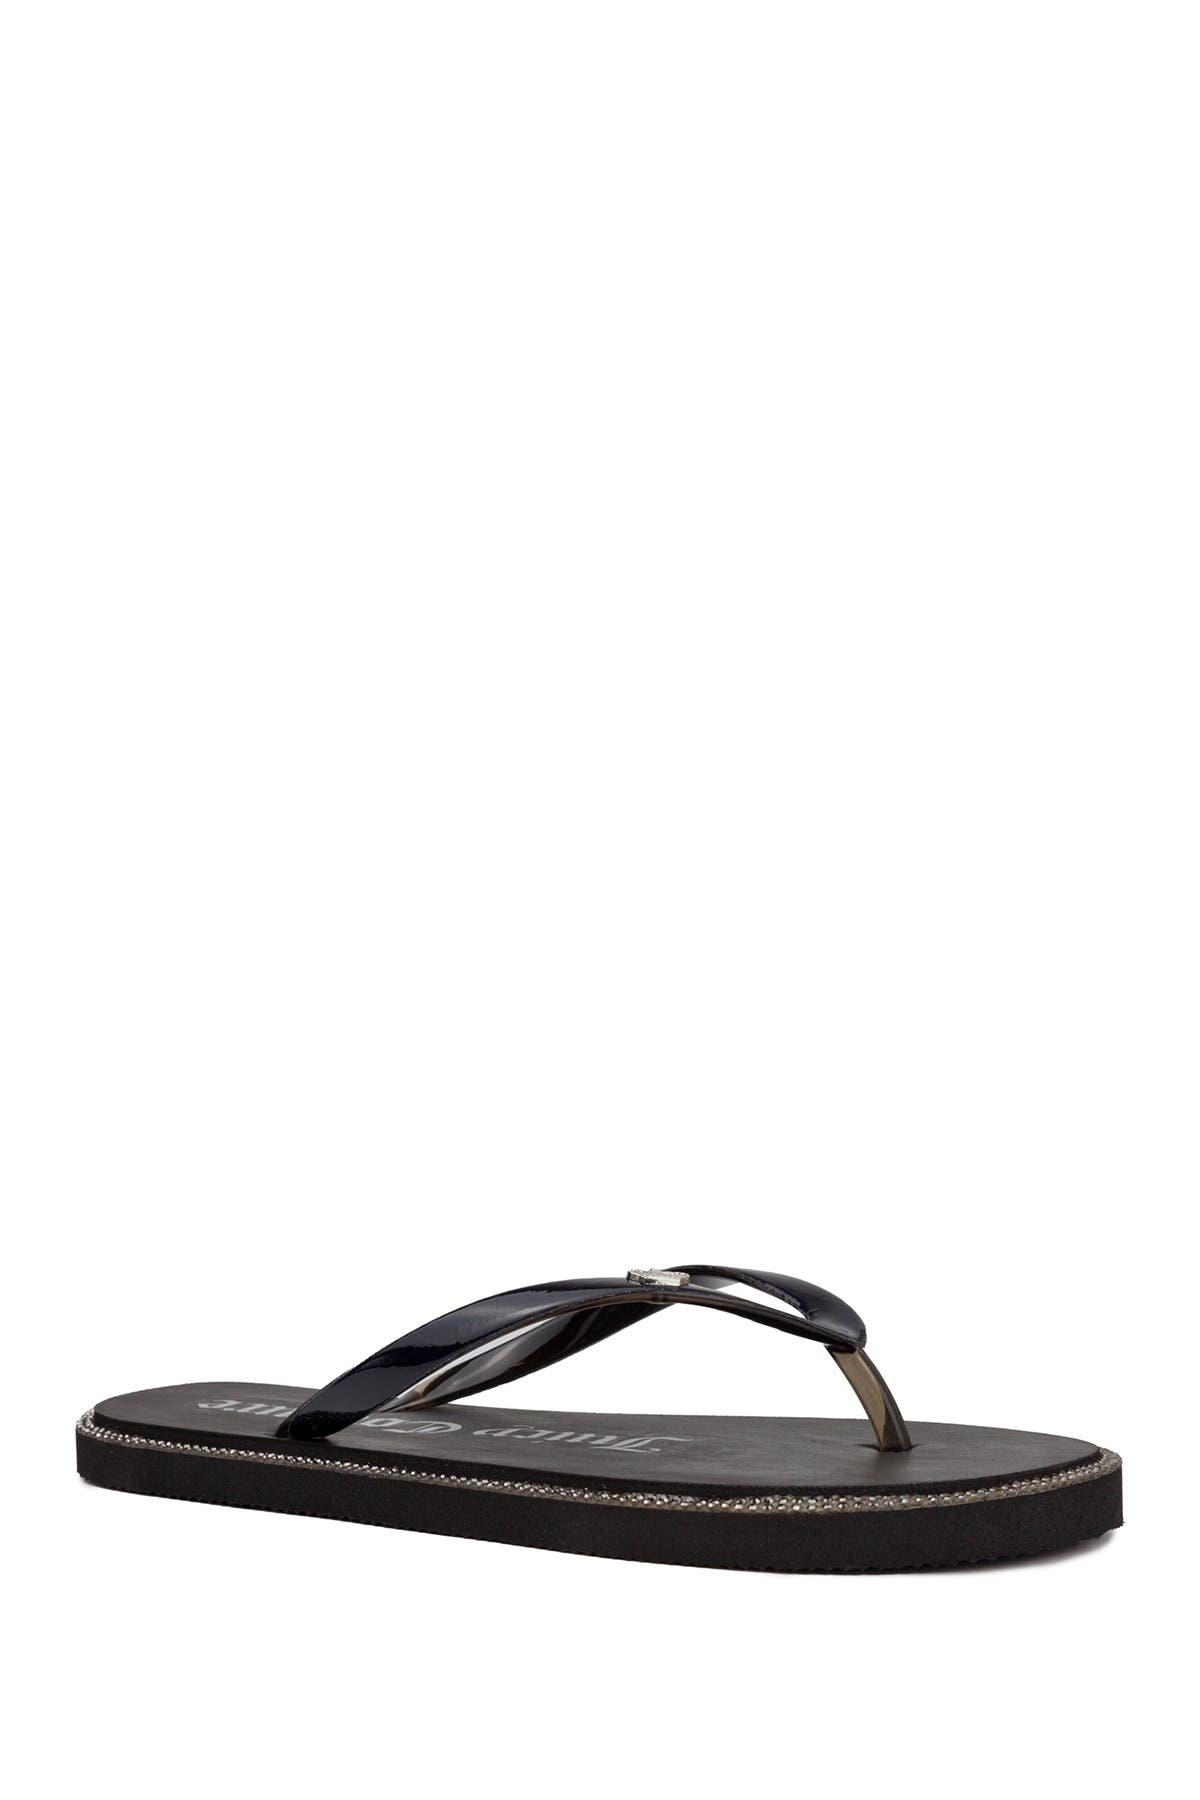 Juicy Couture Sparks Flip Flop Sandal In Oxford